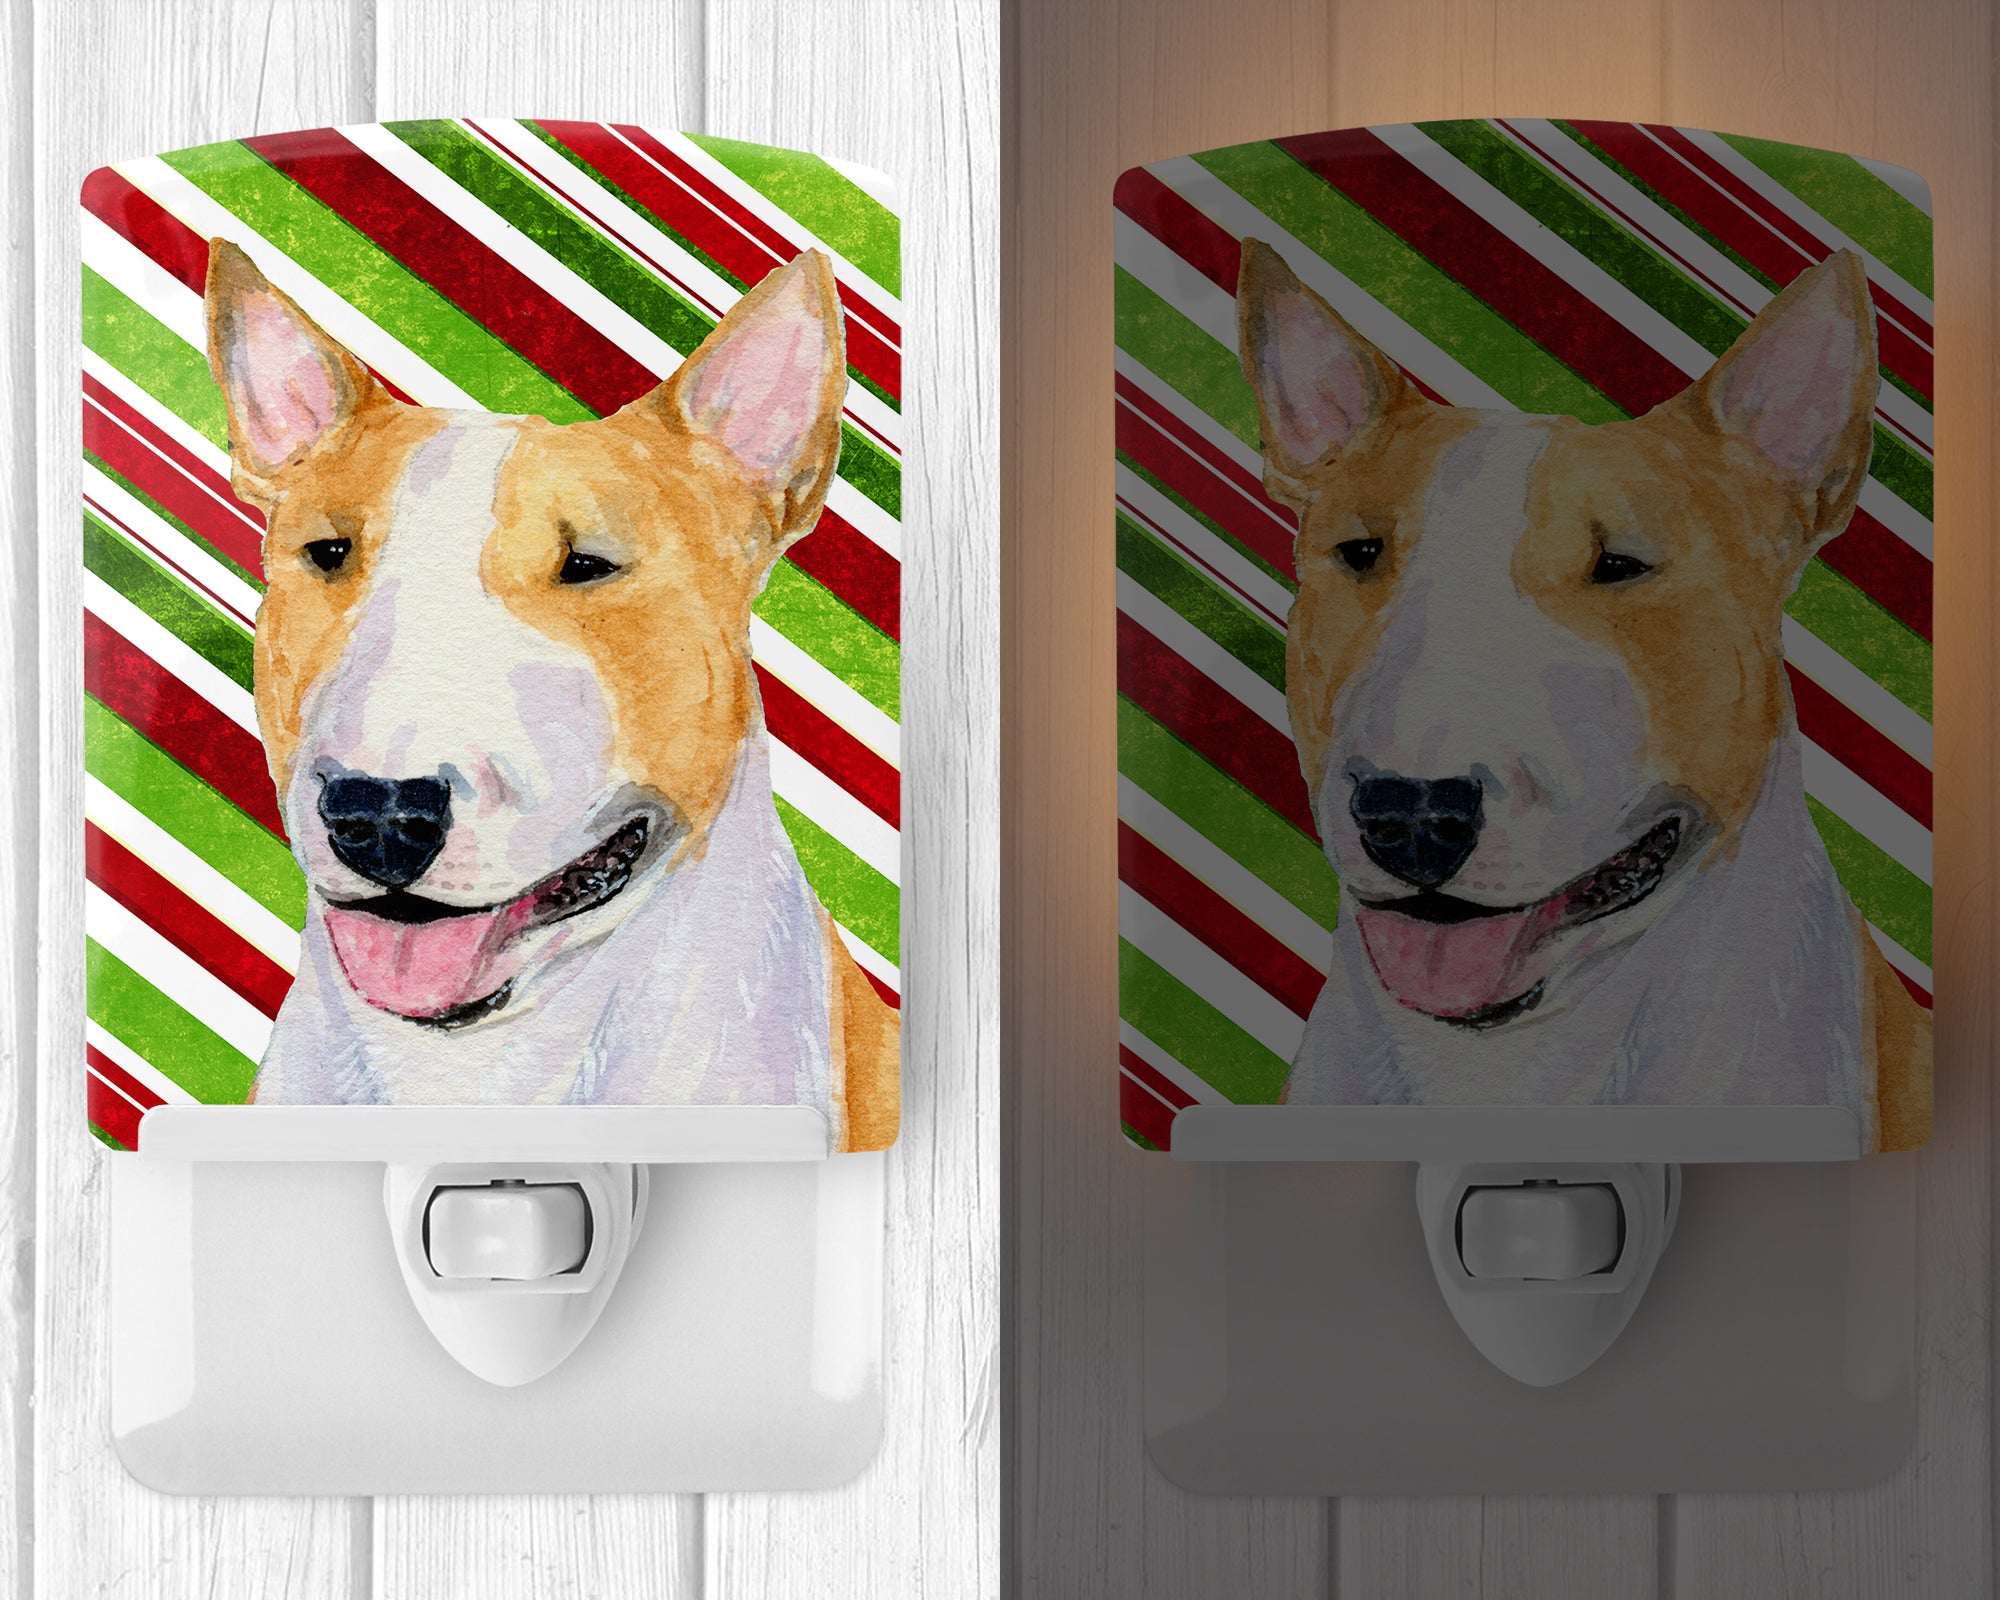 Bull Terrier Candy Cane Holiday Christmas Ceramic Night Light SS4565CNL - the-store.com